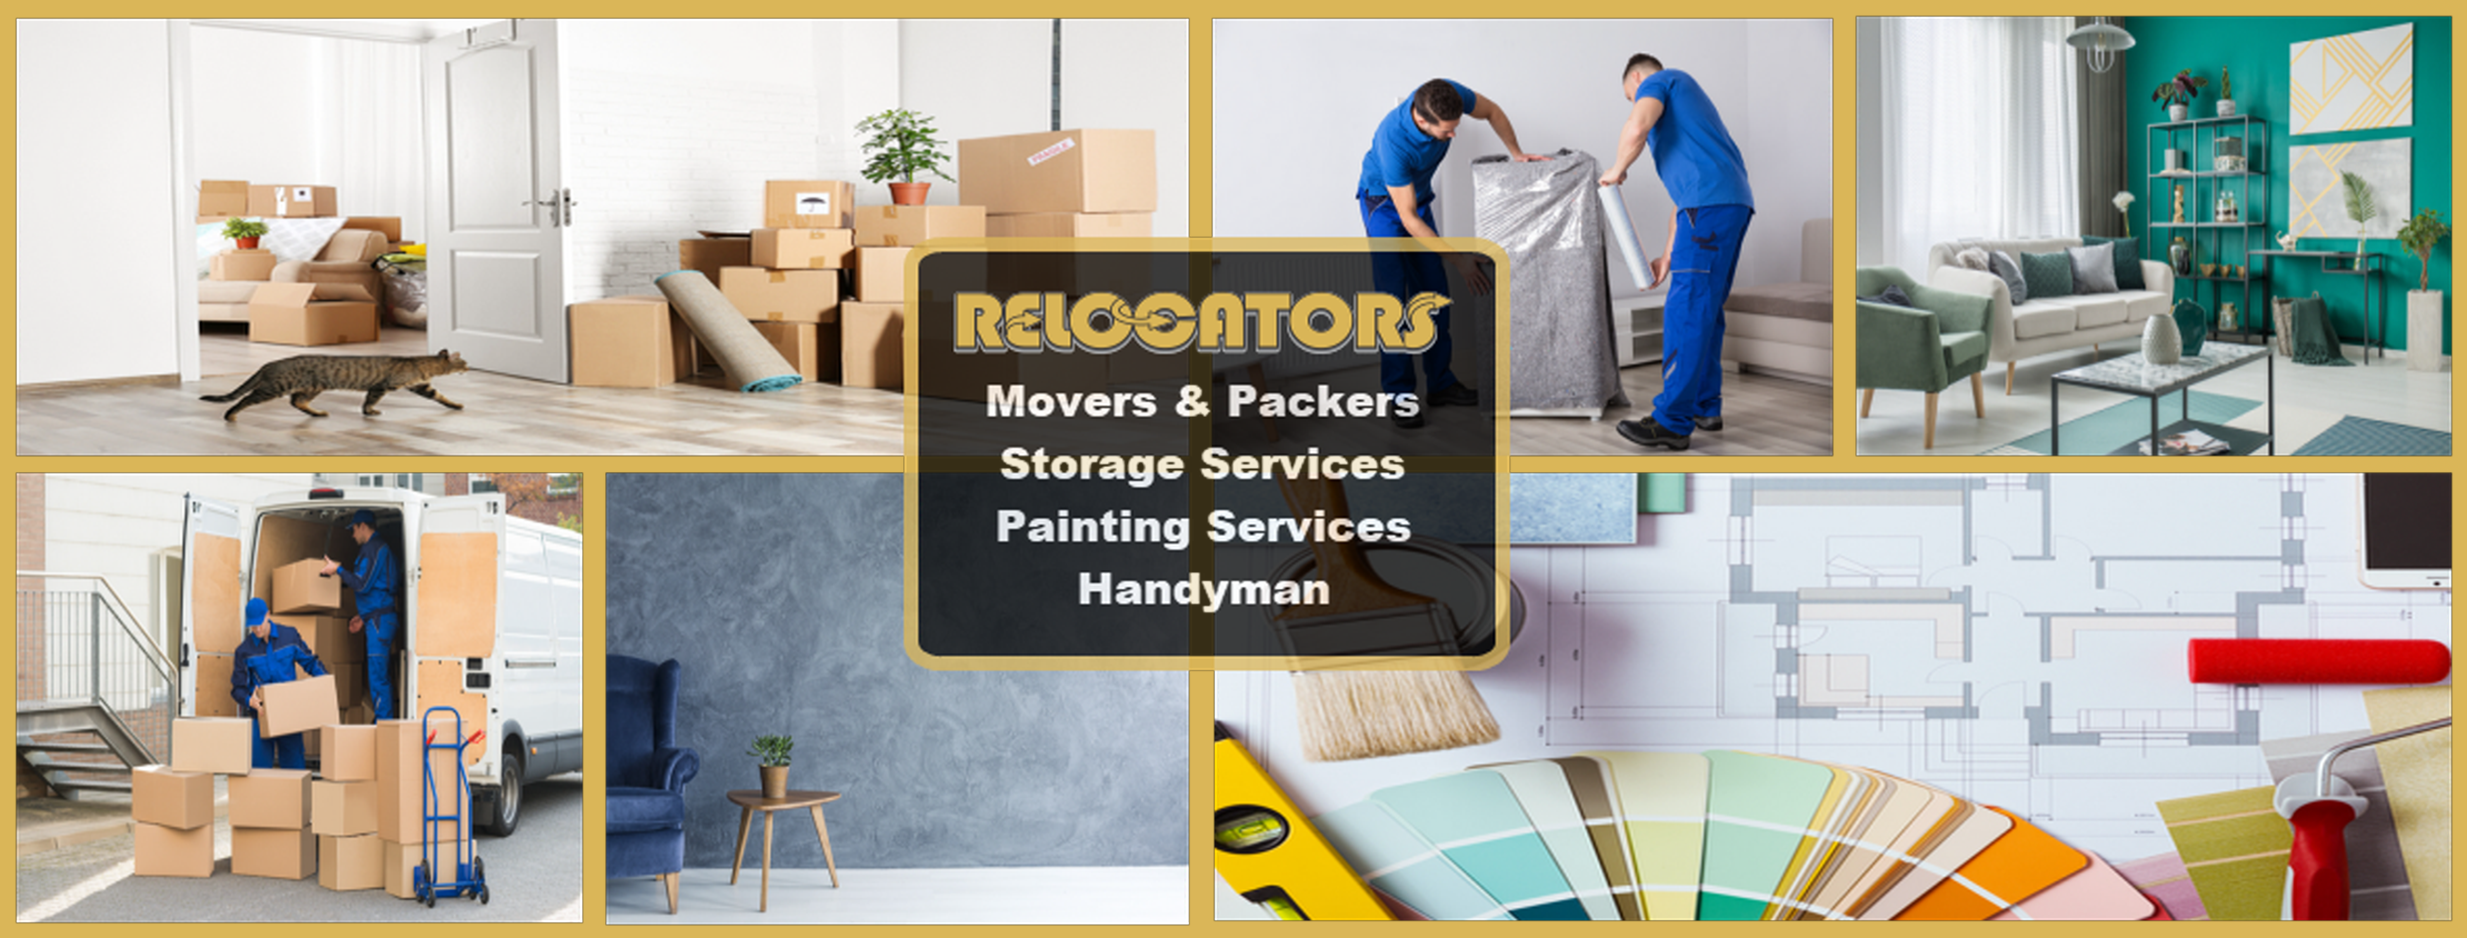 About Relocators